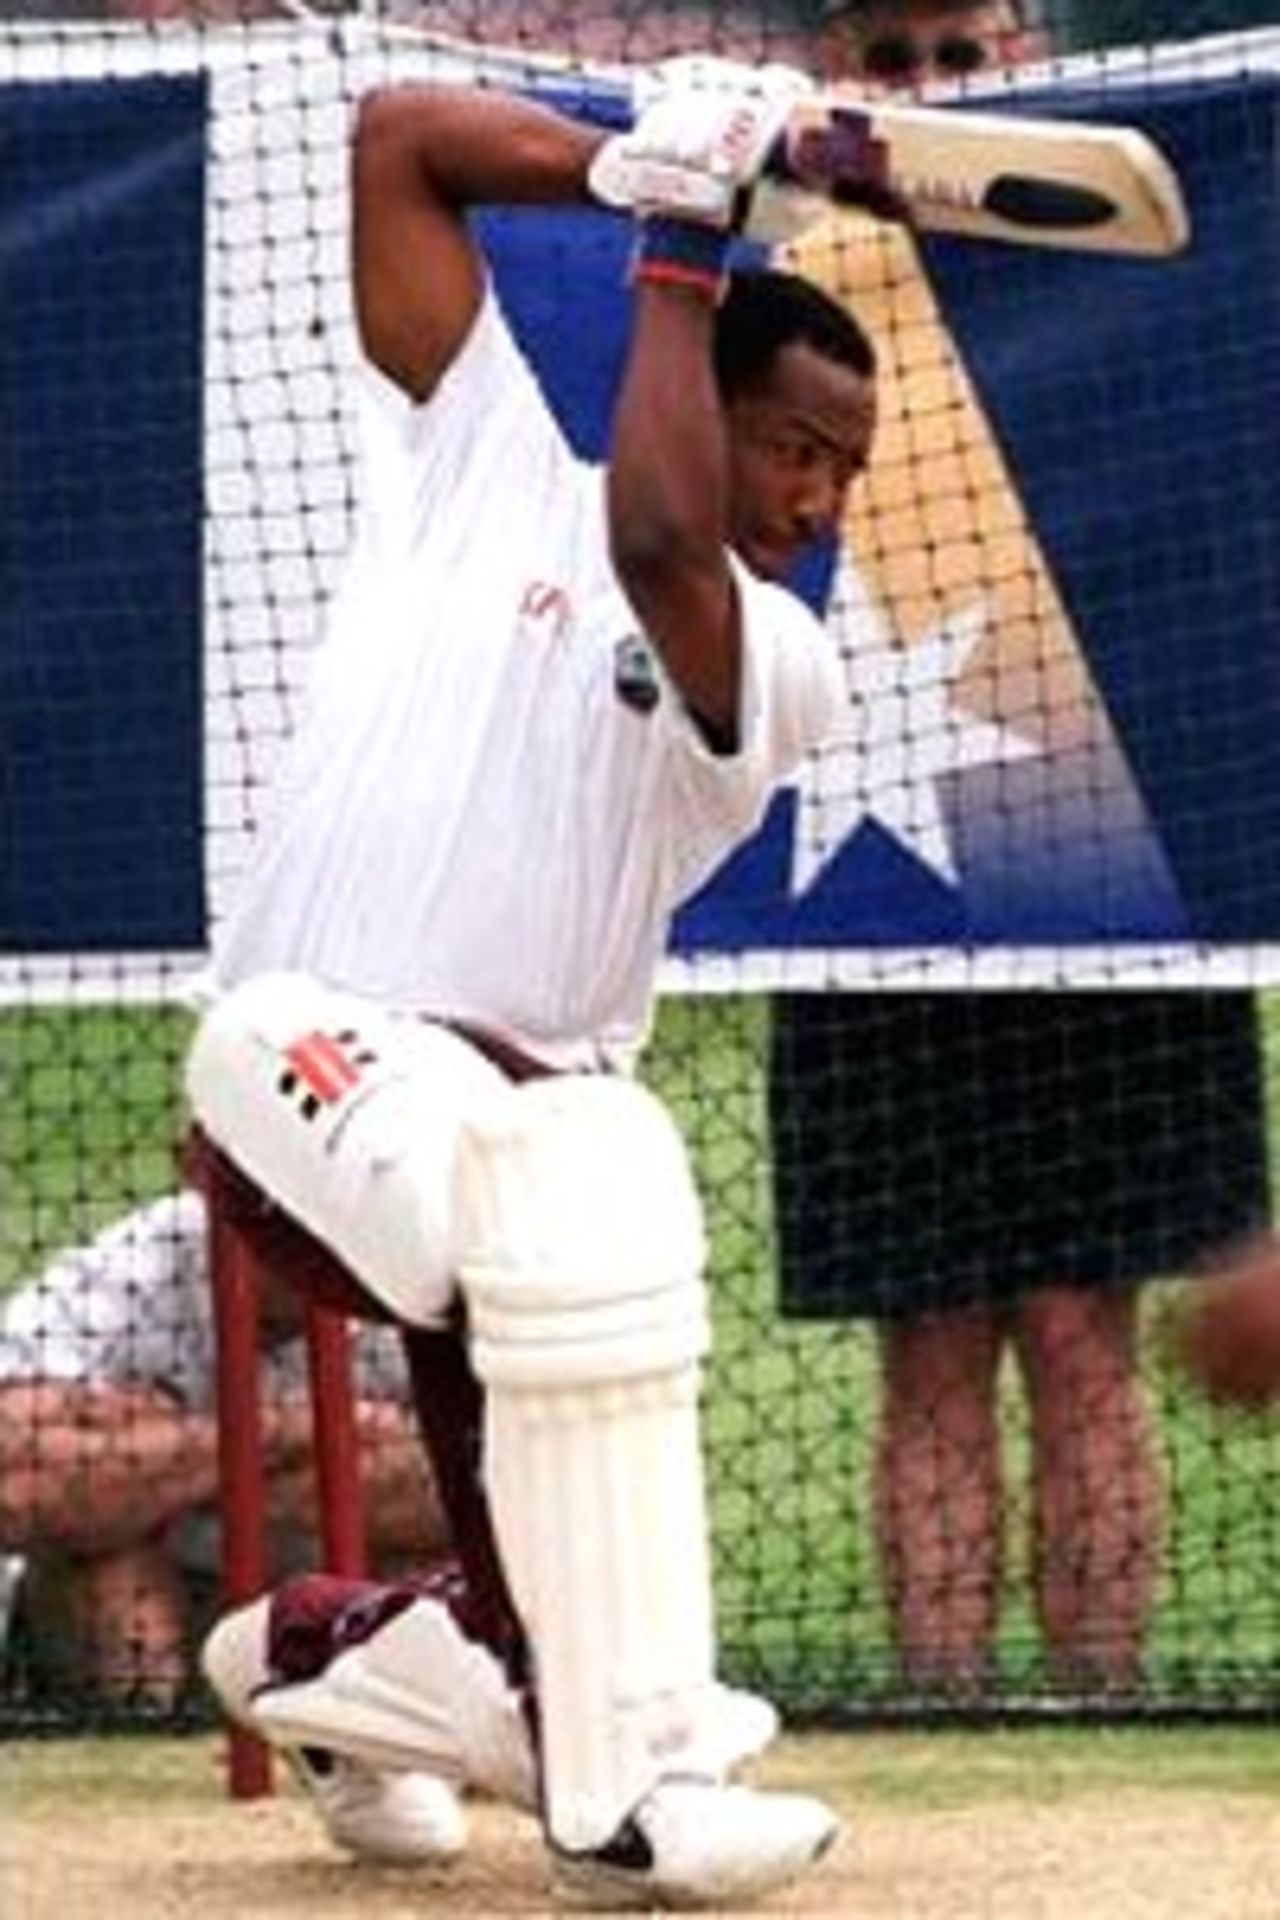 Brian Lara of the West Indies in action during net practice ahead of the First Test Match between Australia and the West Indies at The Gabba cricket ground, Brisbane, Australia.